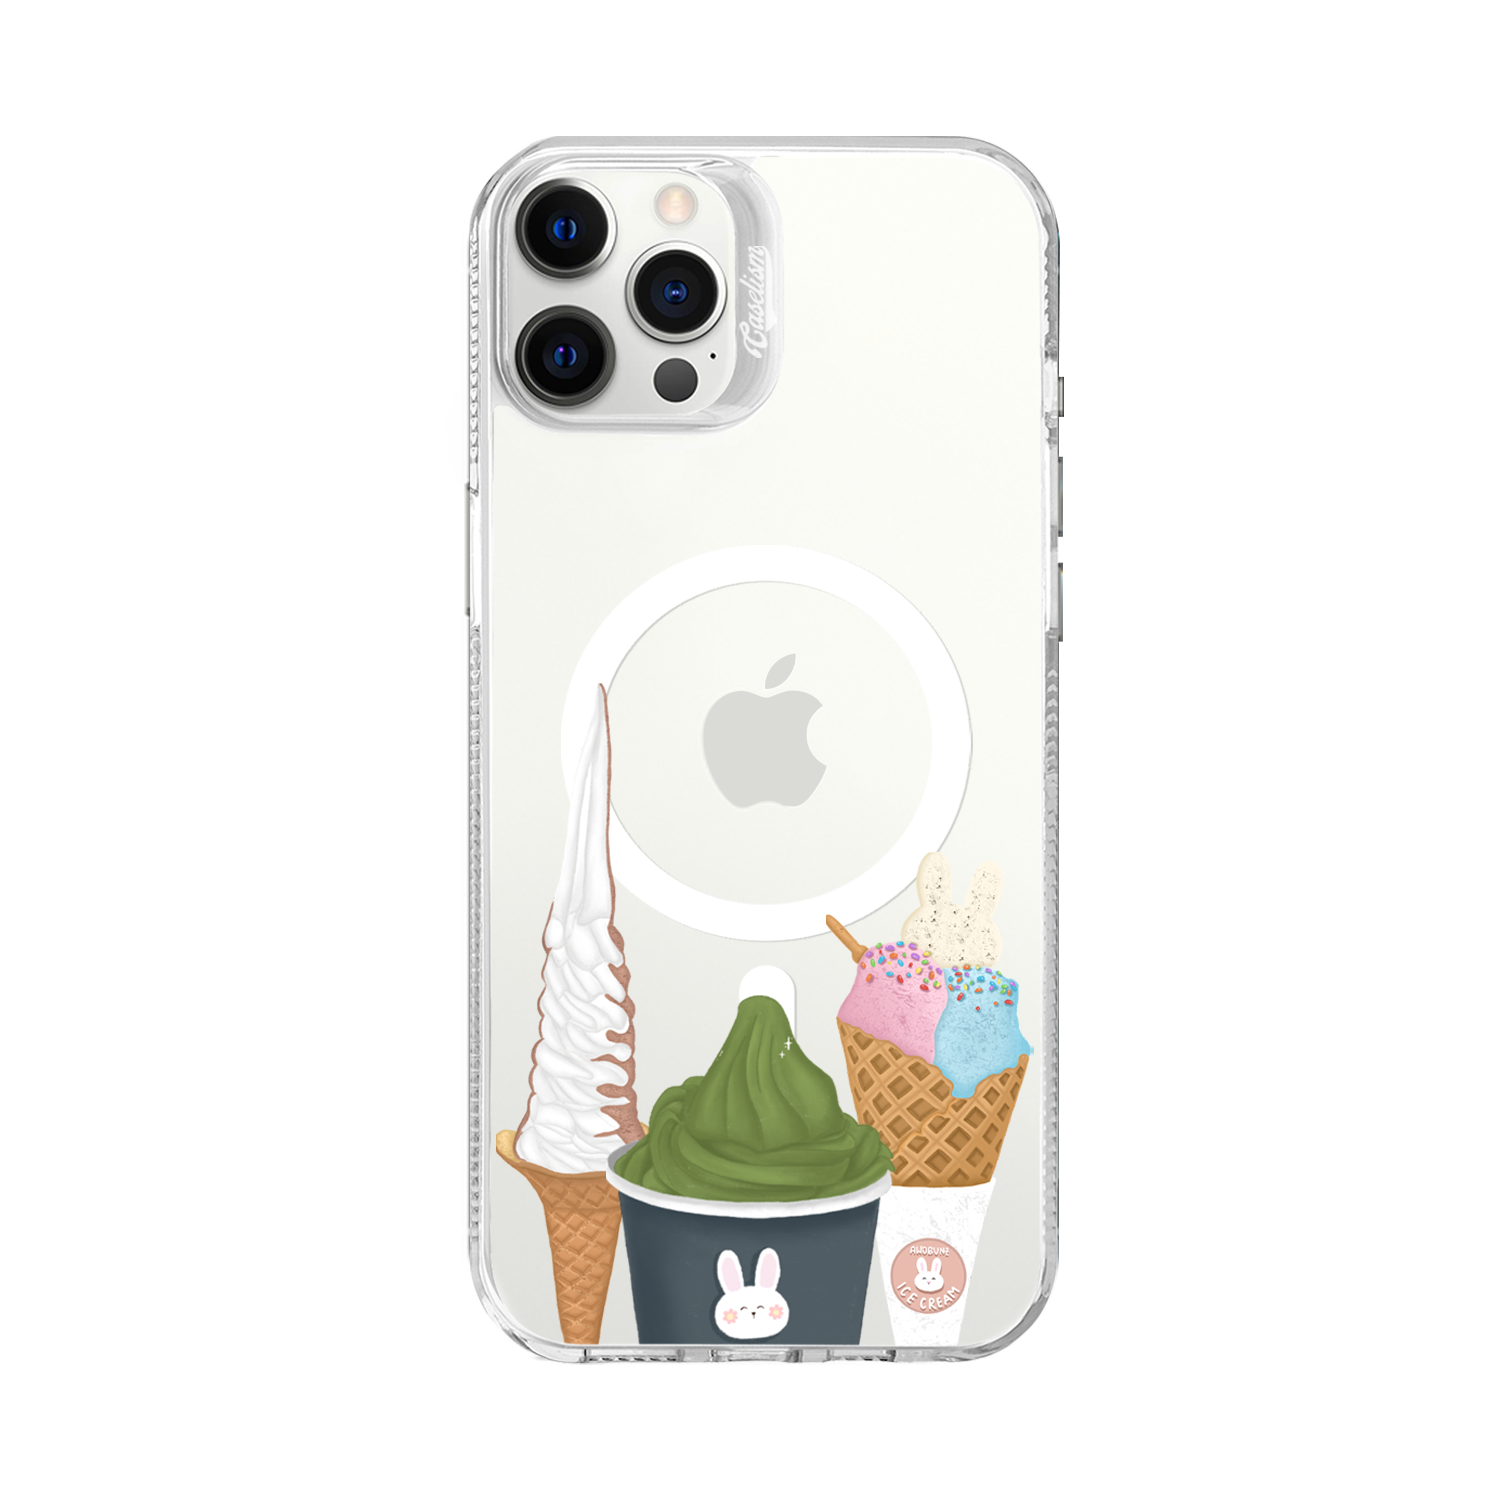 AWOB004 - ColorLite Case for iPhone